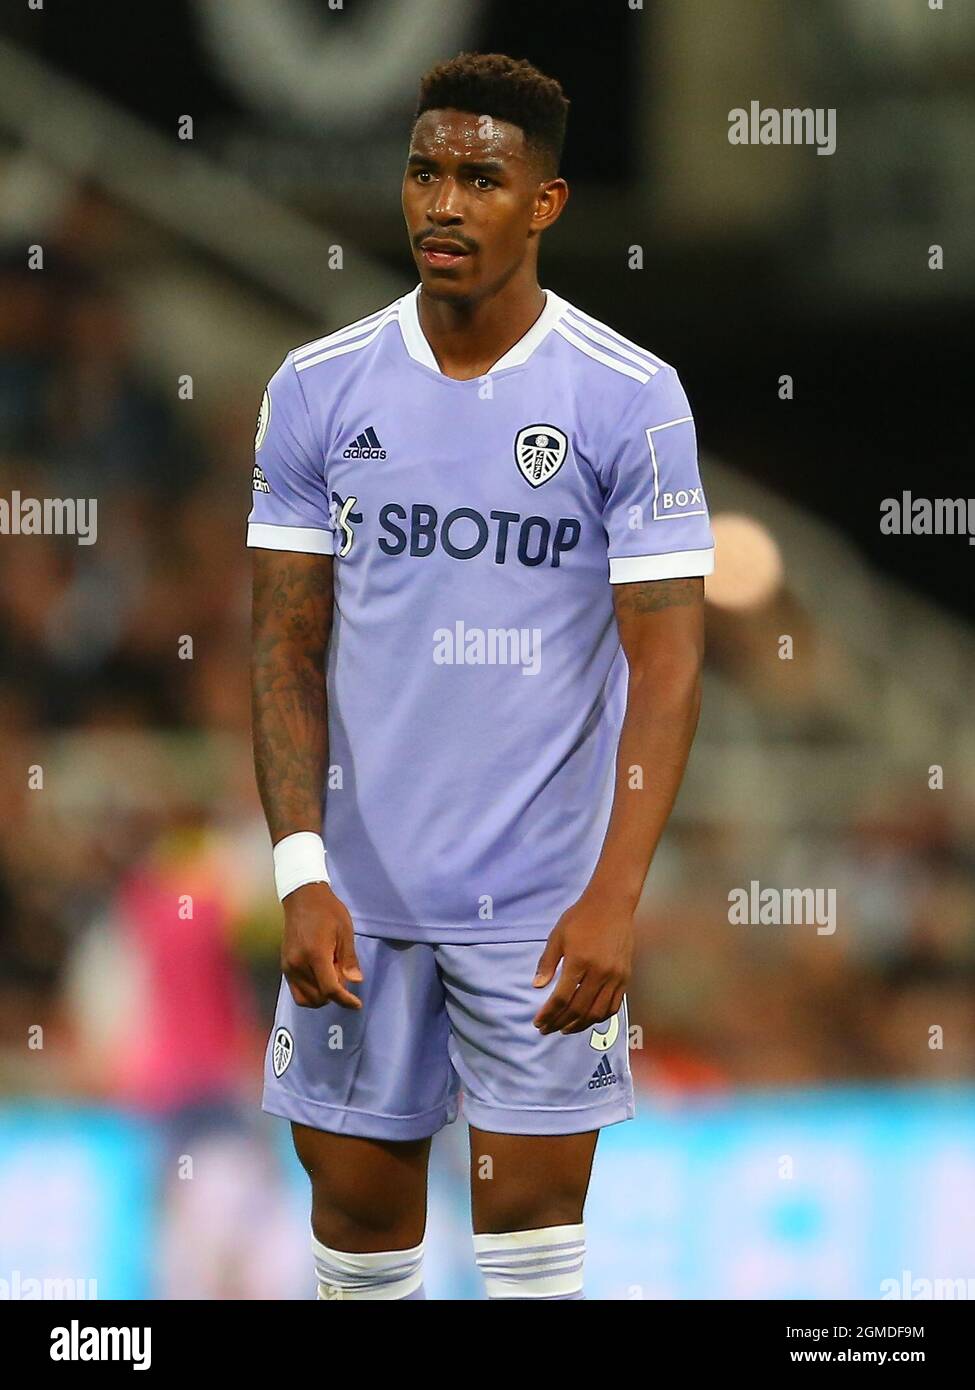 NEWCASTLE UPON TYNE, ENGLAND - SEPTEMBER 17: Junior Firpo of Leeds United during the Premier League match between Newcastle United and Leeds United at St. James Park on September 17, 2021 in Newcastle upon Tyne, England. (Photo by MB Media) Stock Photo